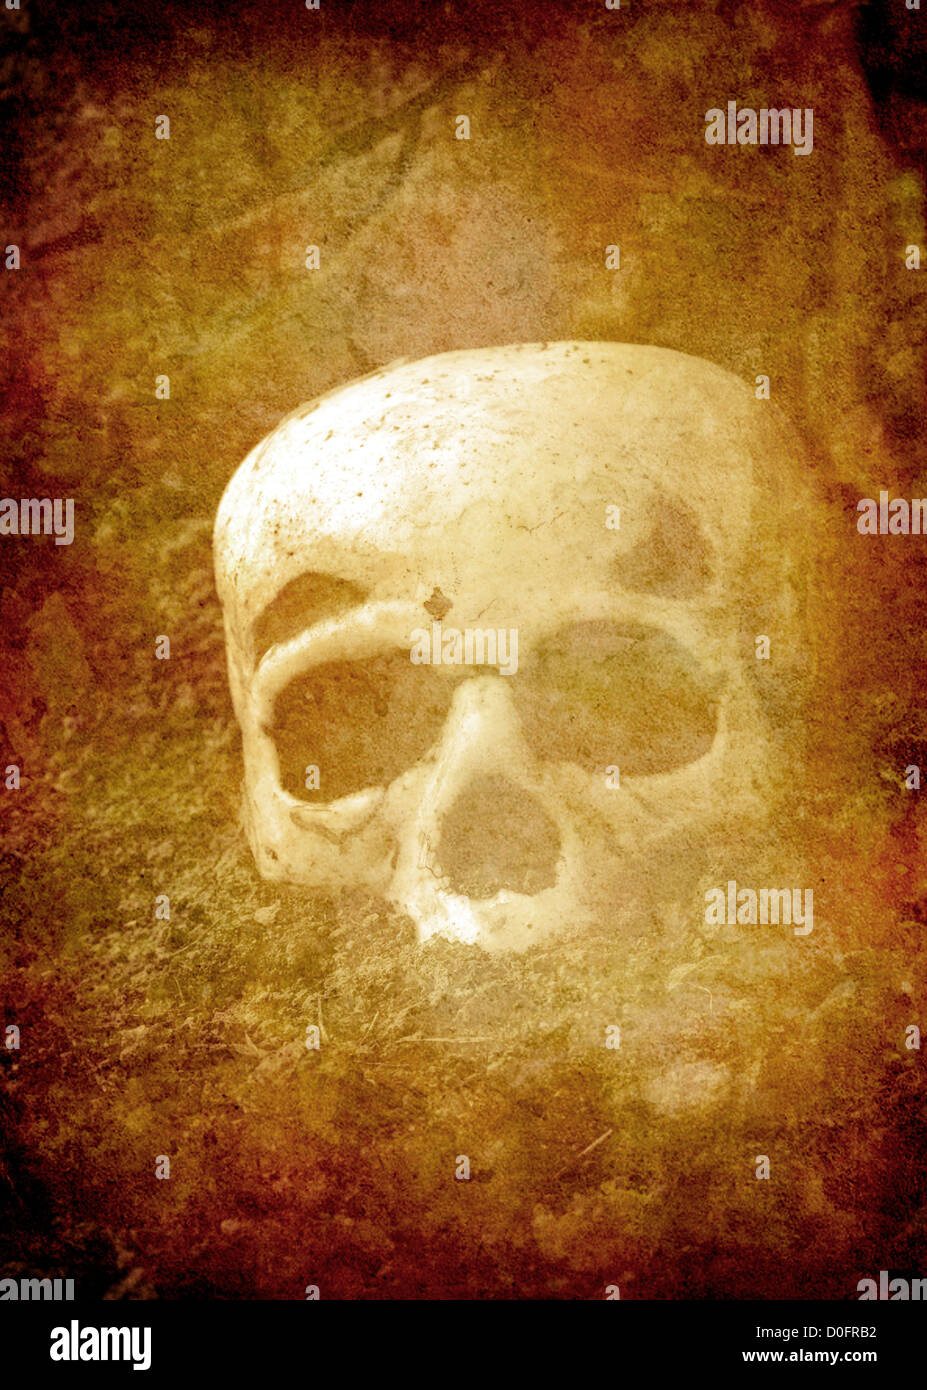 Skull in dirt with sepia tone Stock Photo